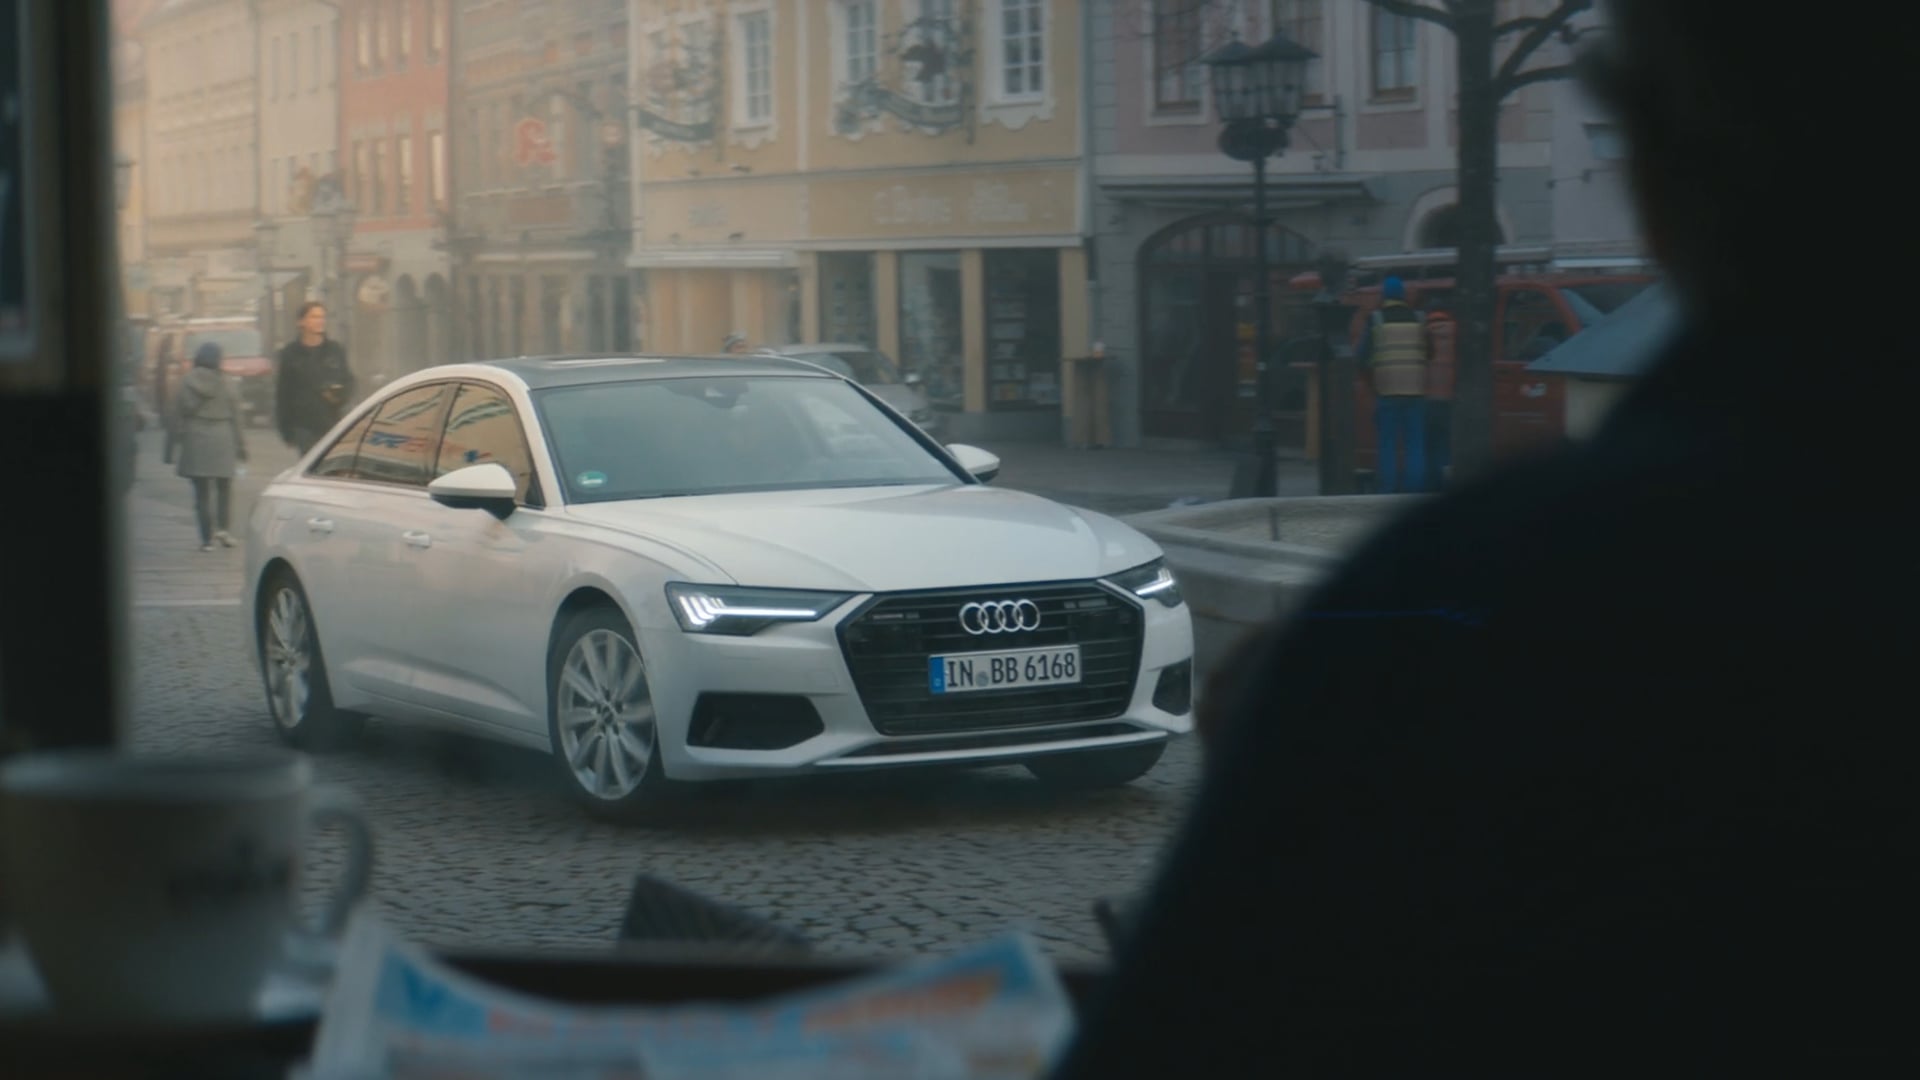 AUDI - Journey to the Unknown